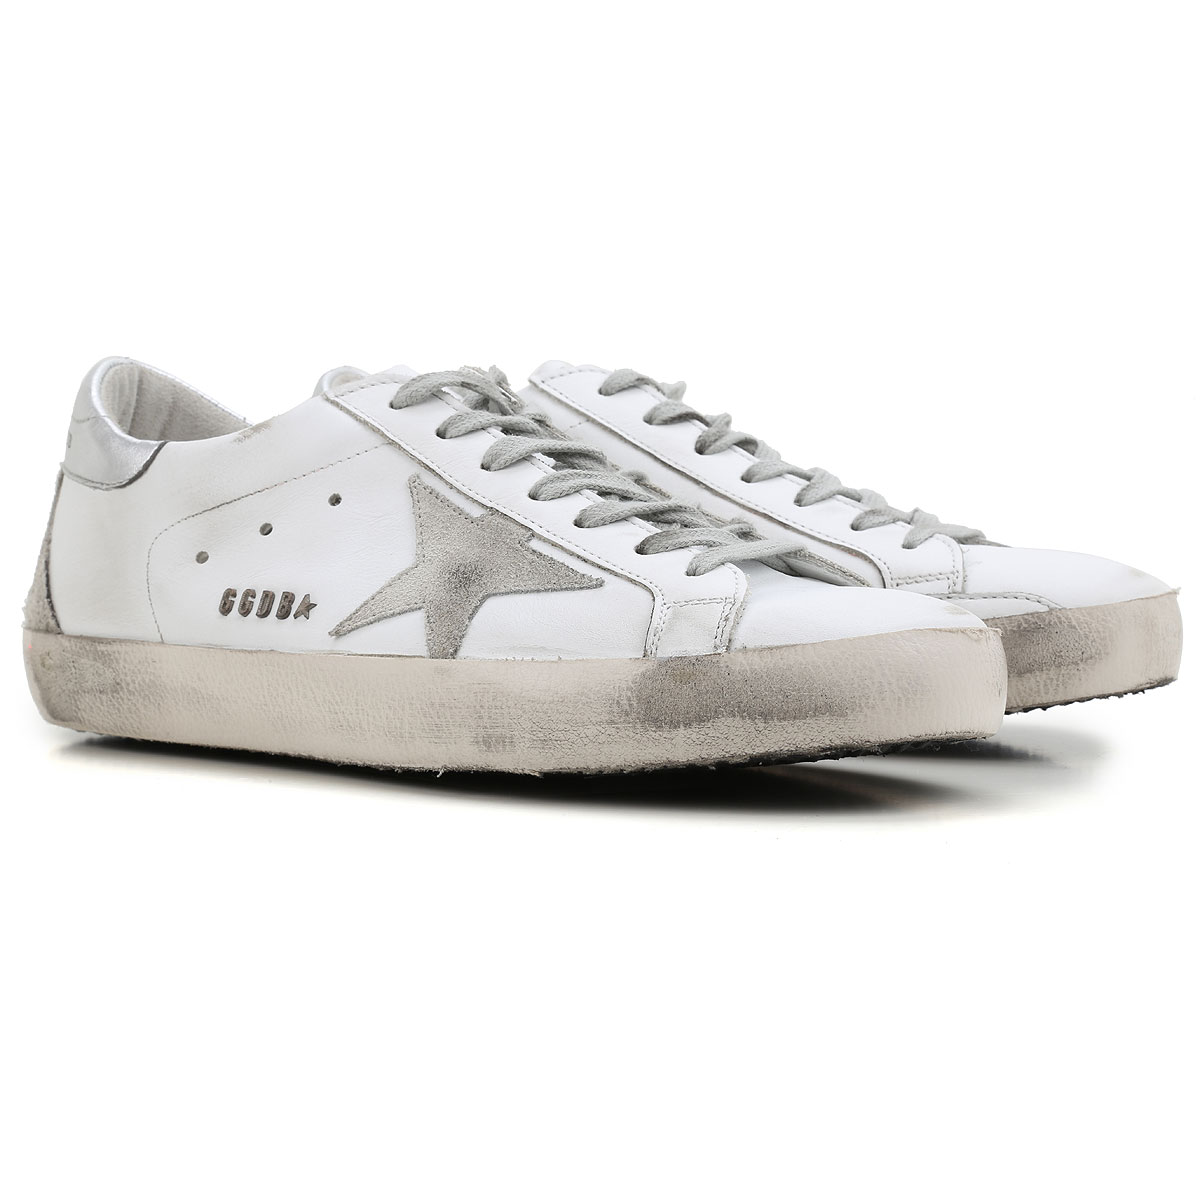 Mens Shoes Golden Goose, Style code: gc0ms590-w77-